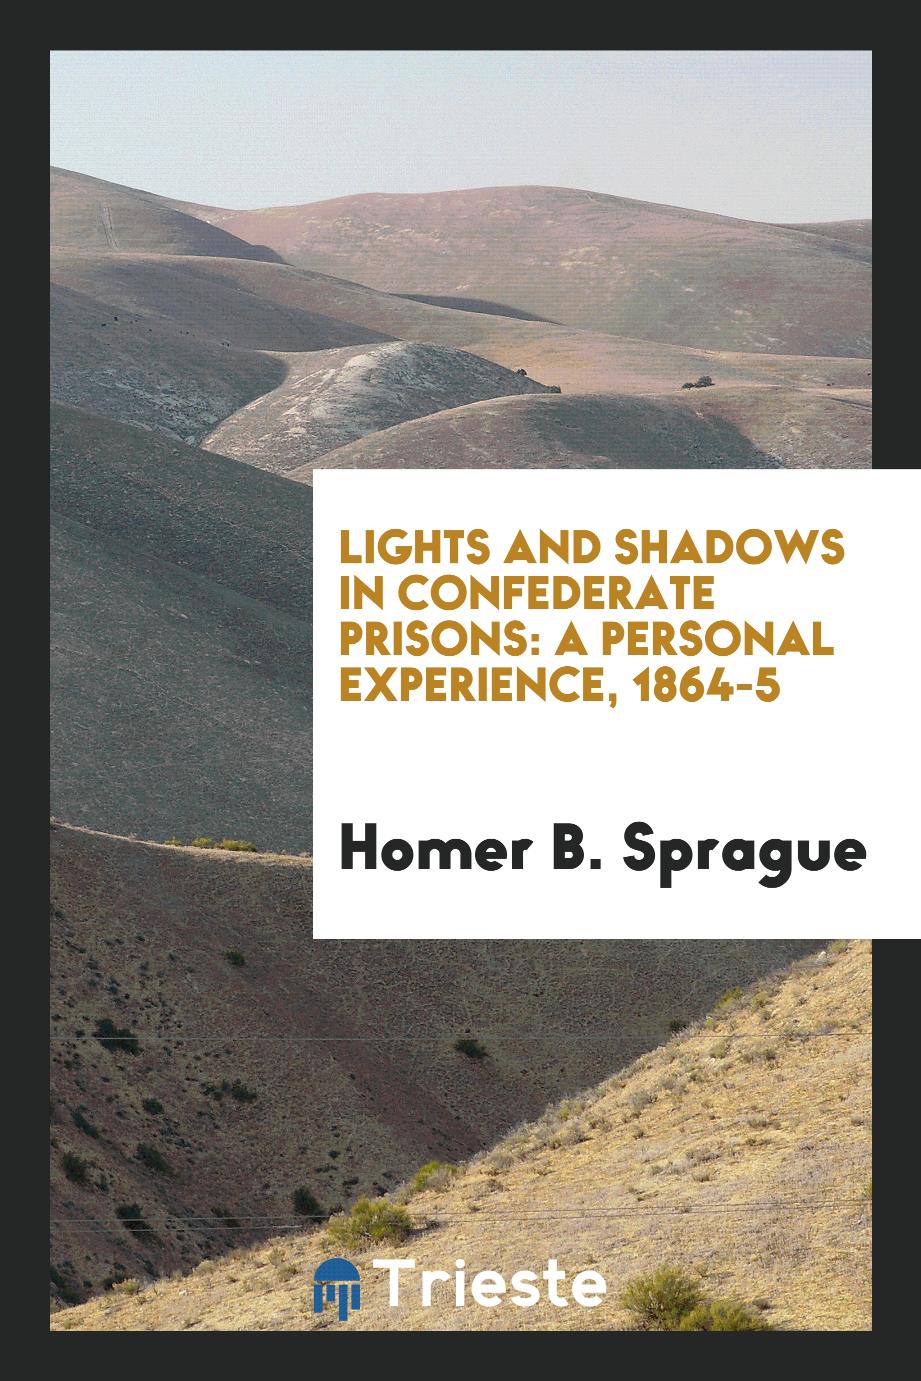 Lights and Shadows in Confederate Prisons: A Personal Experience, 1864-5